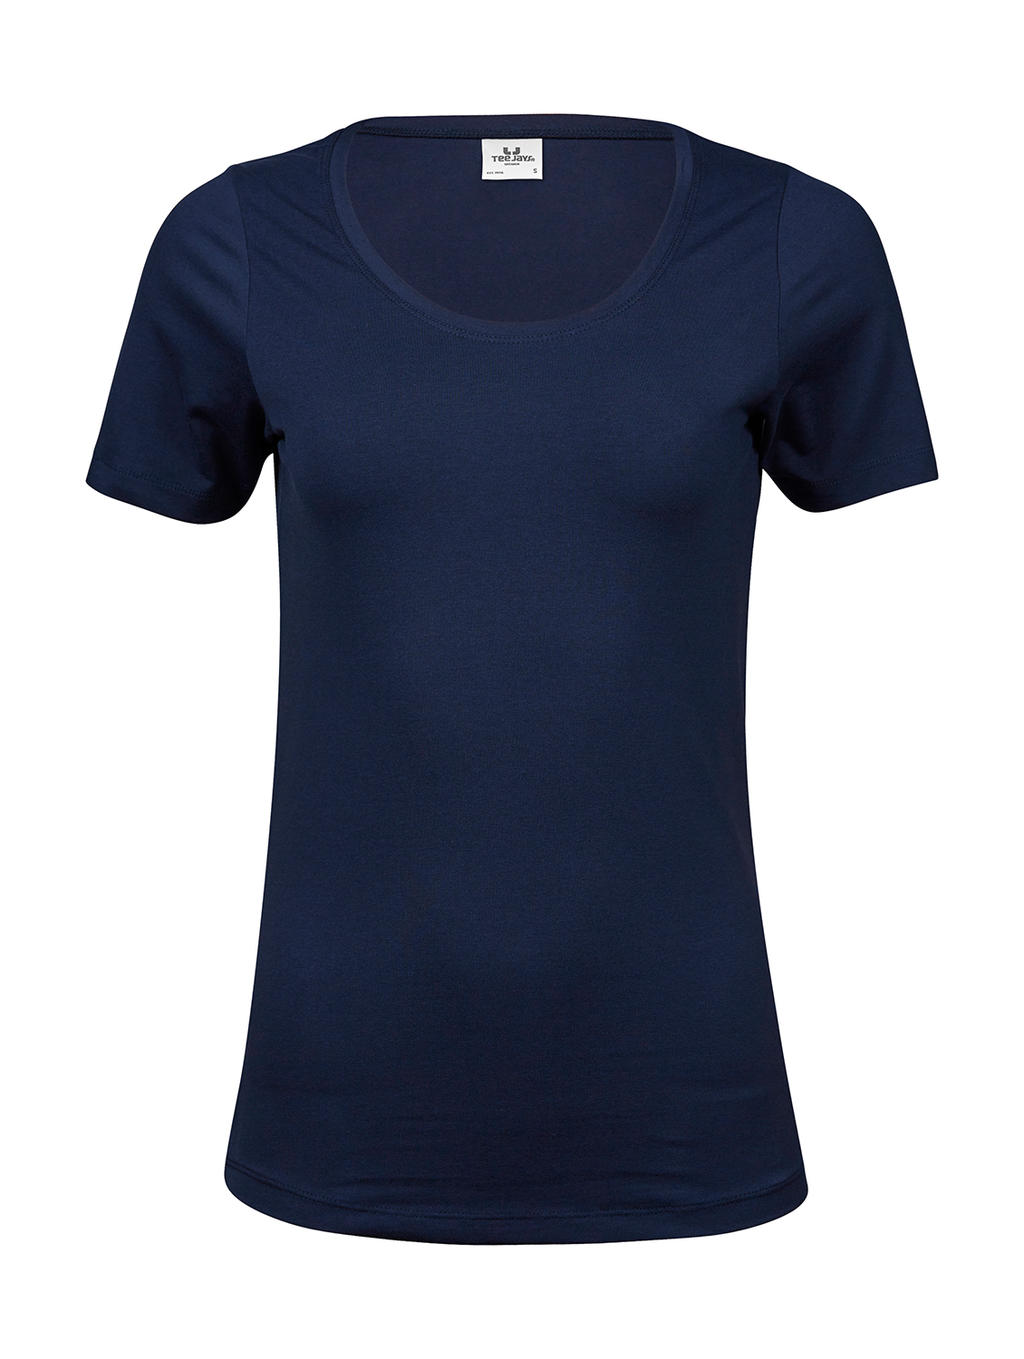  Ladies Stretch Tee in Farbe Navy